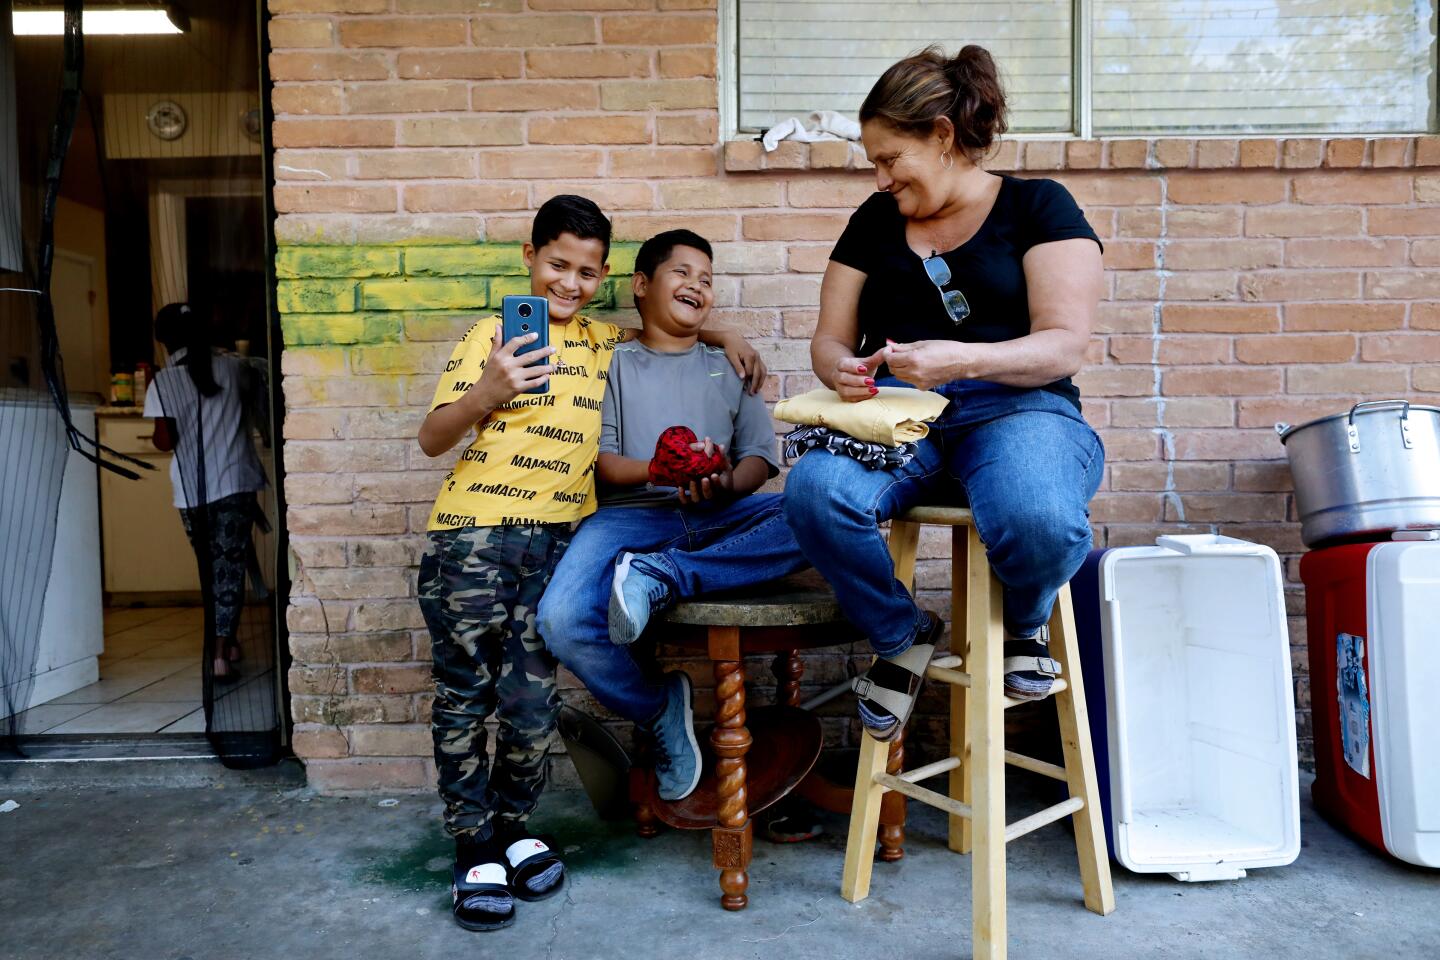 HOUSTON, TEXAS -- SATURDAY, OCTOBER 12, 2019: Dilcia Sabillon Aceituno, 40, of Naco, Honduras, with her twin sons Anthony Leiva Sabillon, 12, and Nostier Leiva Sabillon at her cousins apartment in Houston, Texas, on Oct. 12, 2019. Dilcia and Anthony were returned to Ciudad Juarez under "Remain in Mexico" while her husband and Nostier were allowed to stay in the U.S. in Houston. The three of them were recently united when Dilcia was allowed to pursue her amnesty case in the U.S. (Gary Coronado / Los Angeles Times)